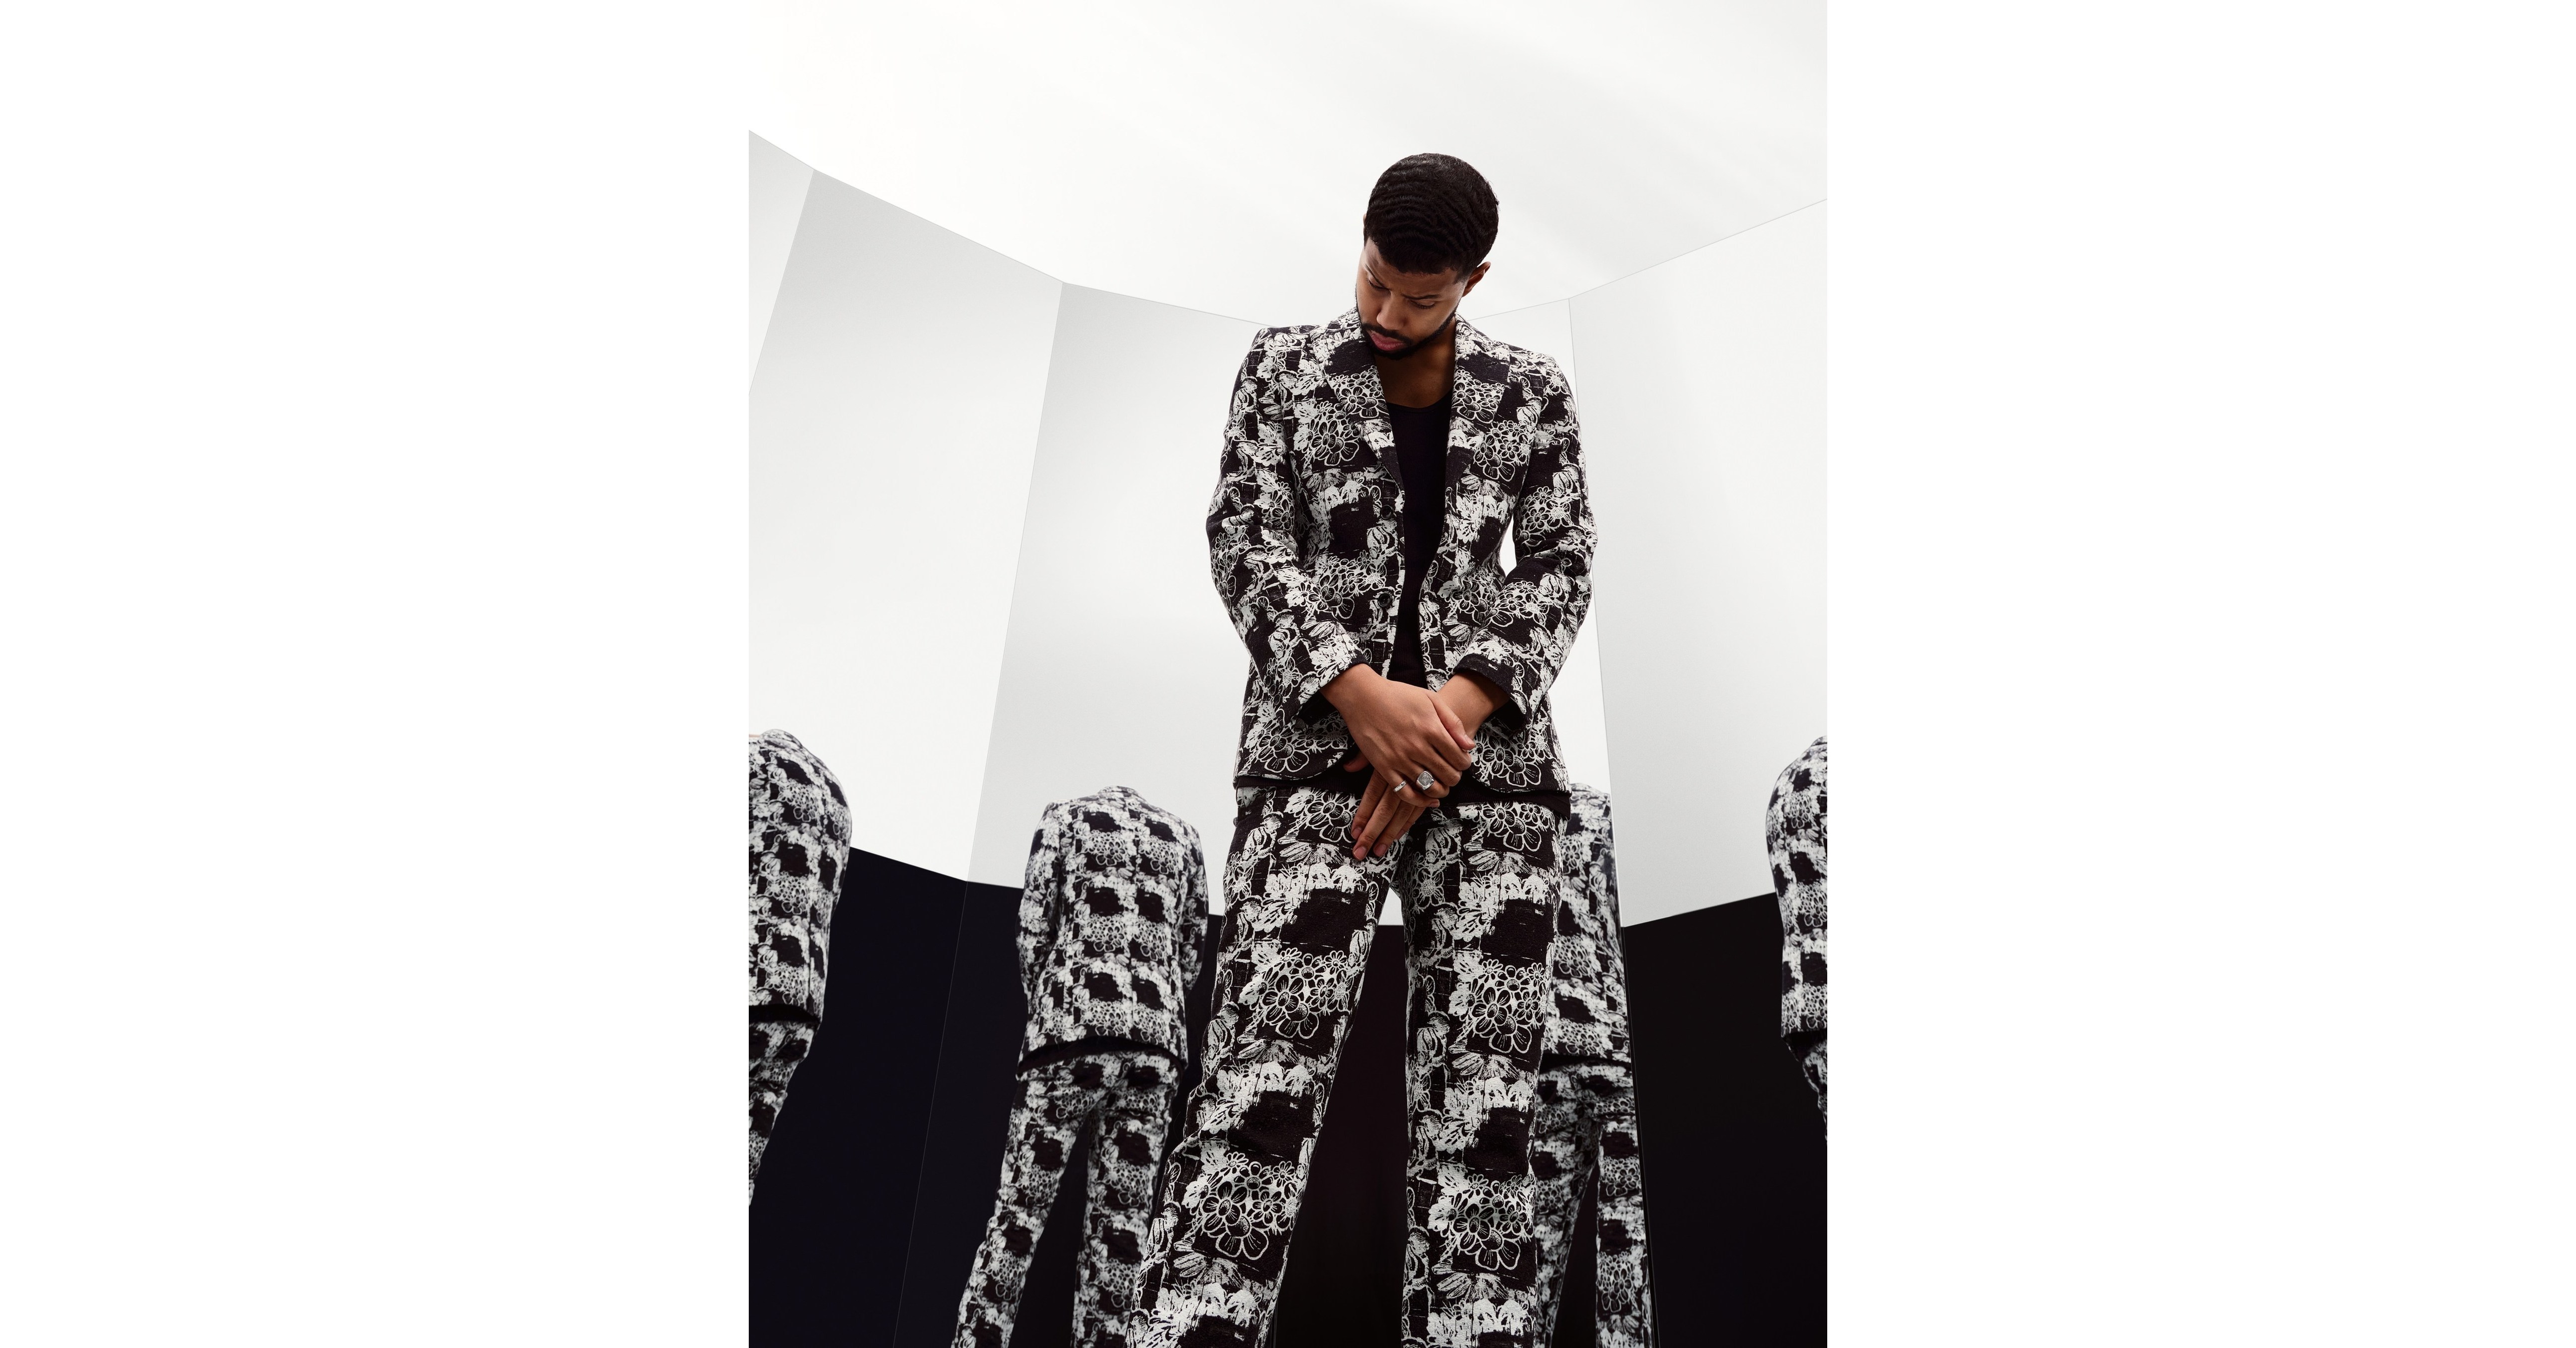 Holt Renfrew Launches Spring Campaign Starring Mustafa